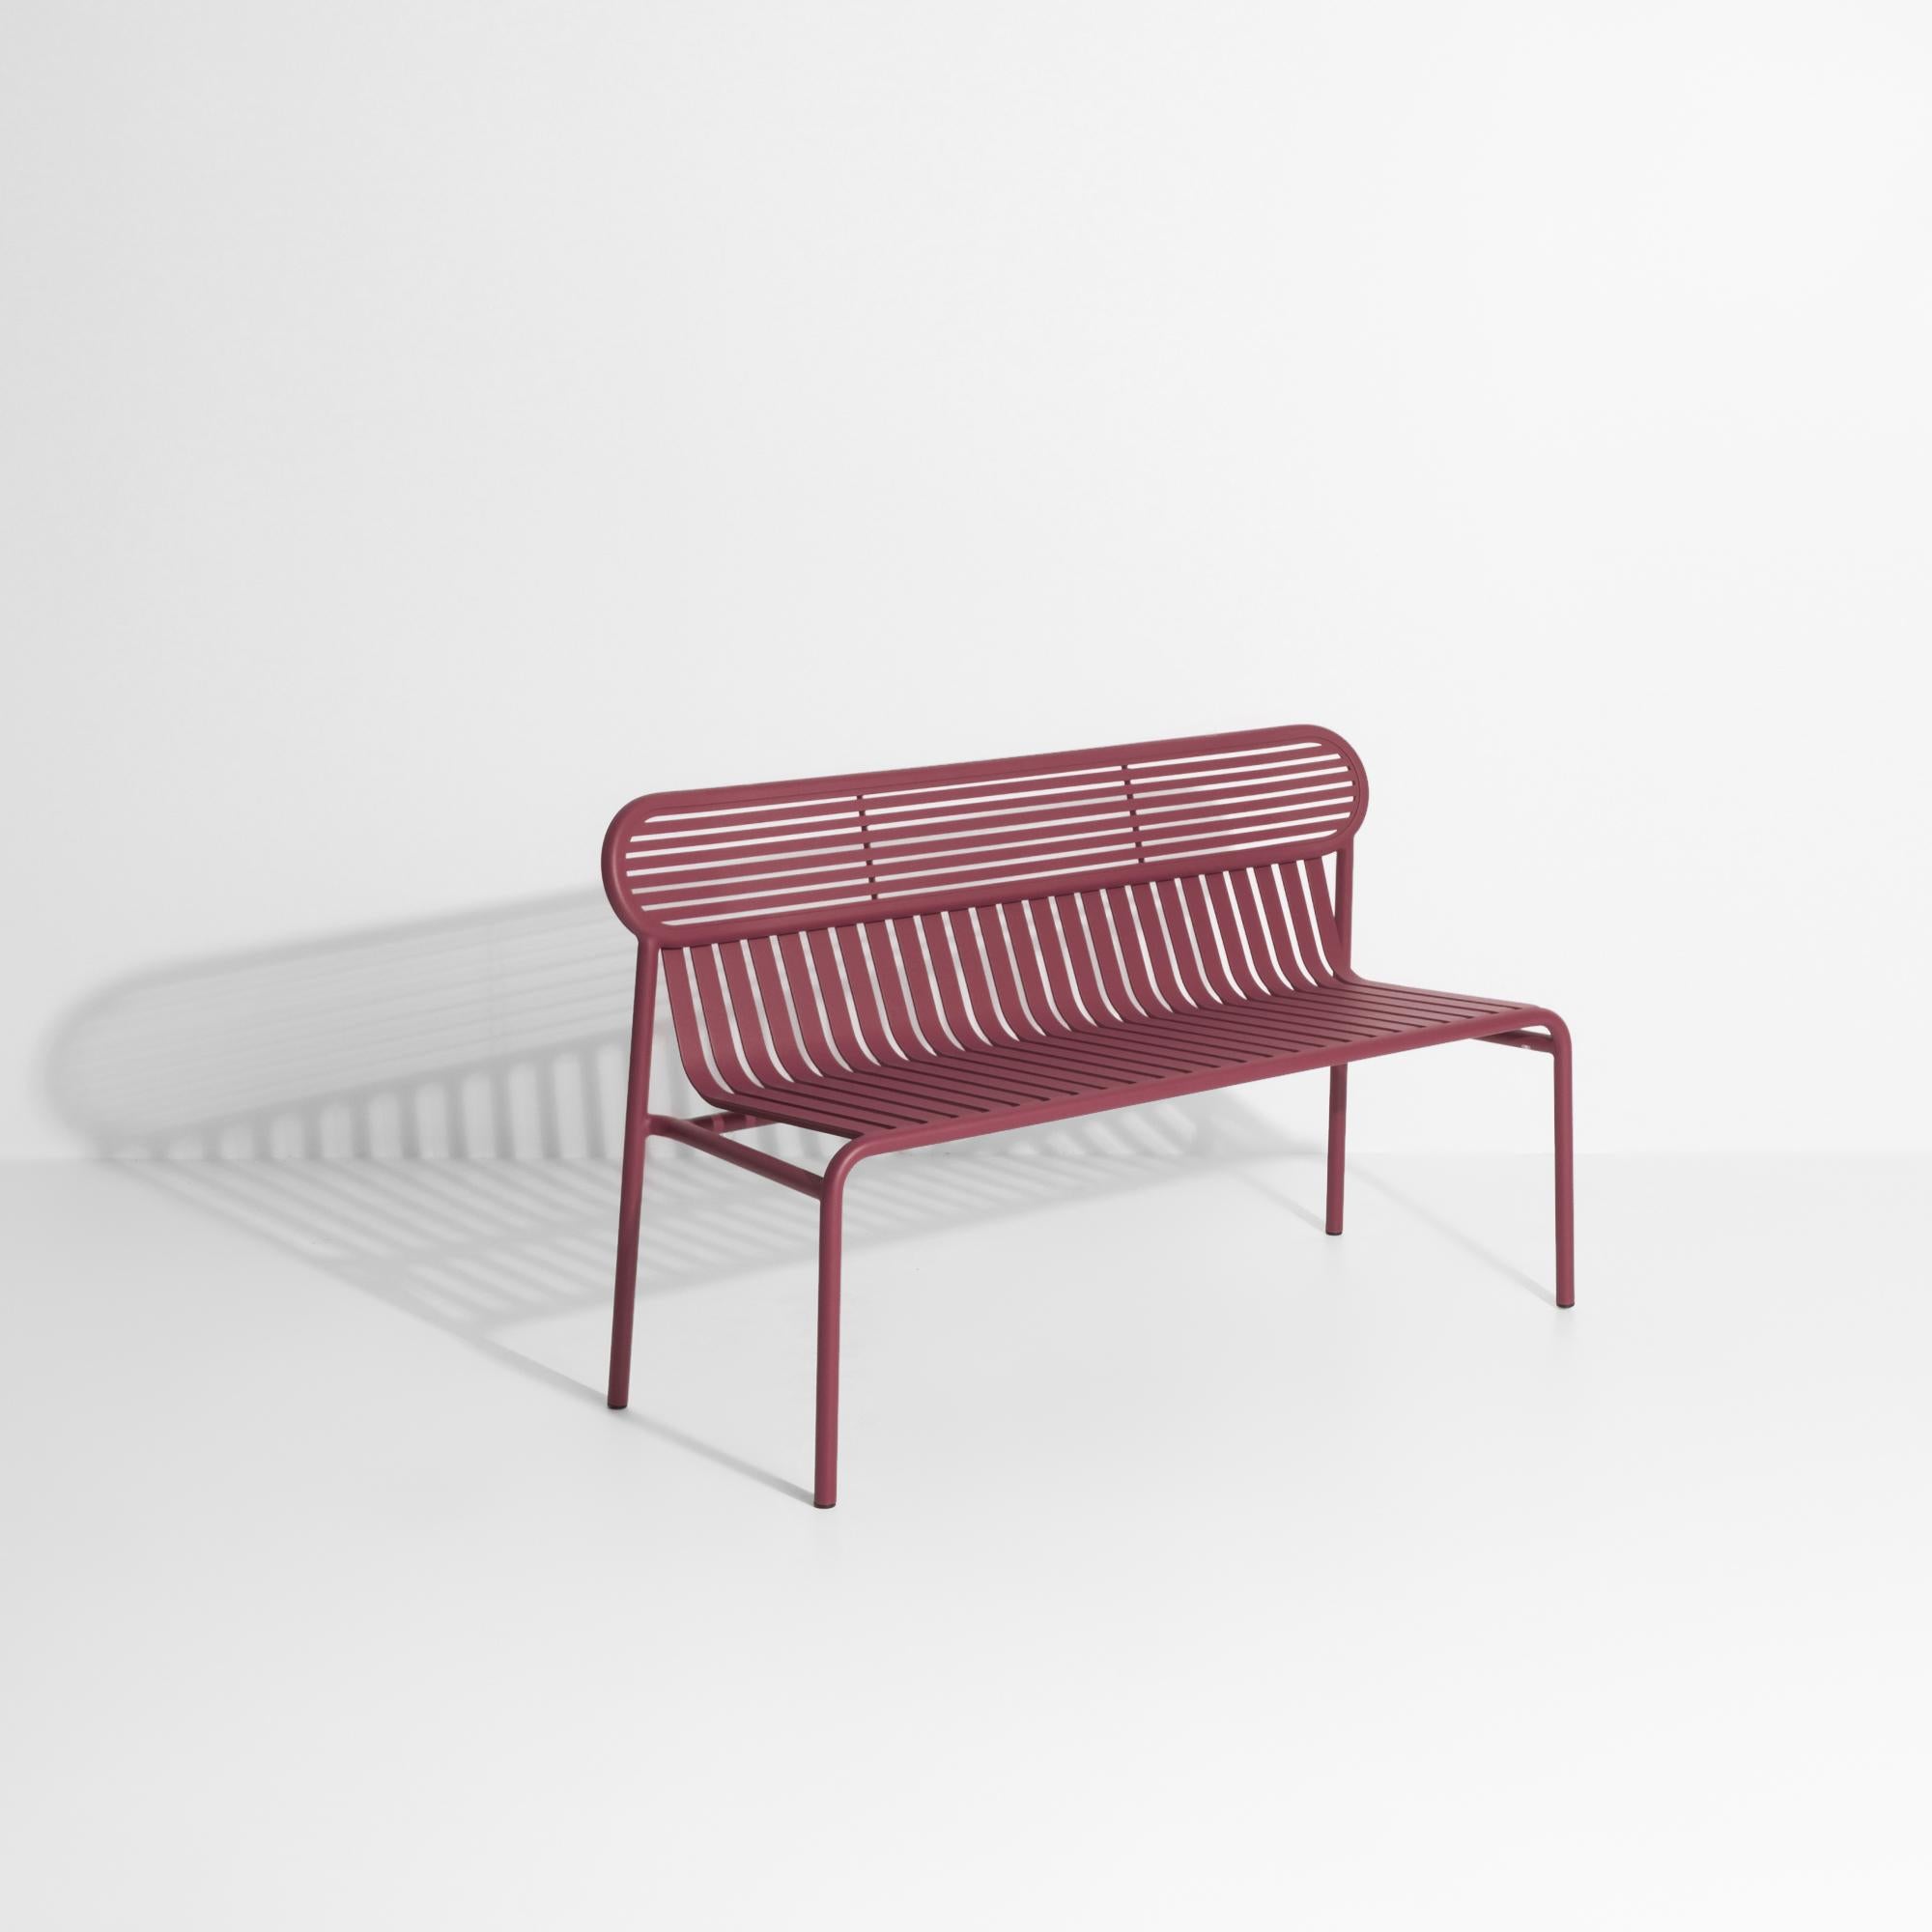 Contemporary Petite Friture Week-End Bench in Burgundy Aluminium by Studio BrichetZiegler For Sale